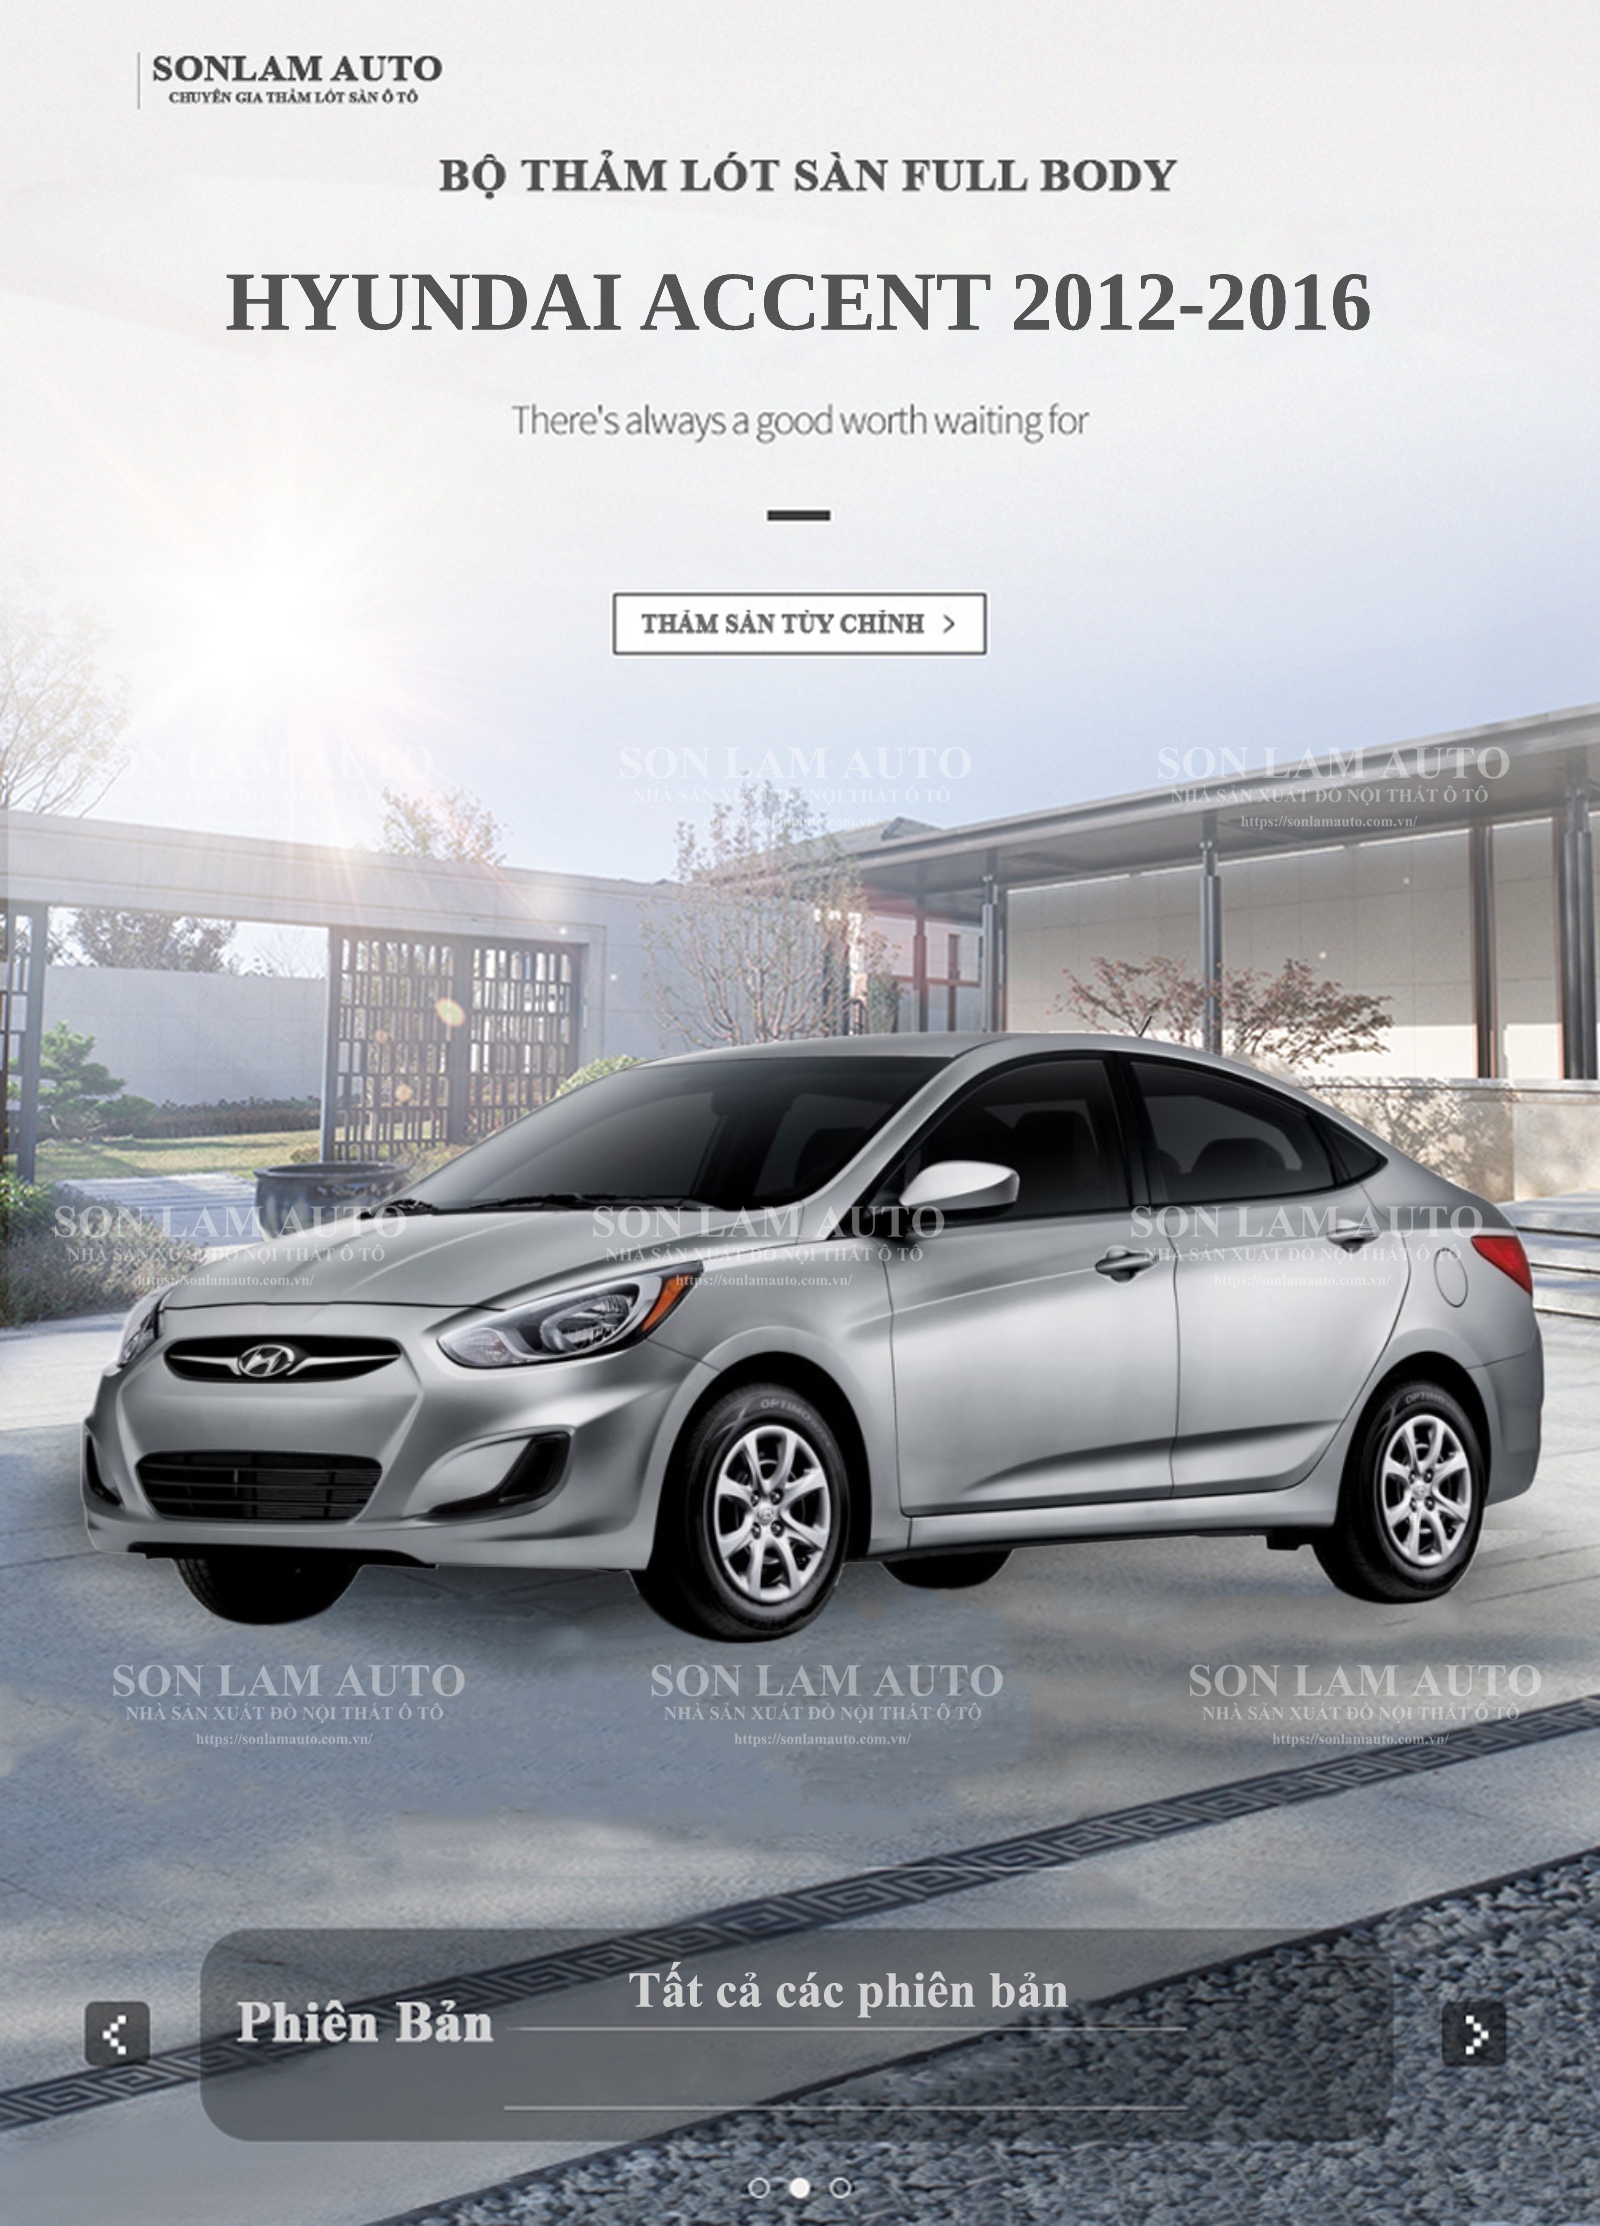 2012 Hyundai Accent First Drive 8211 Review 8211 Car and Driver